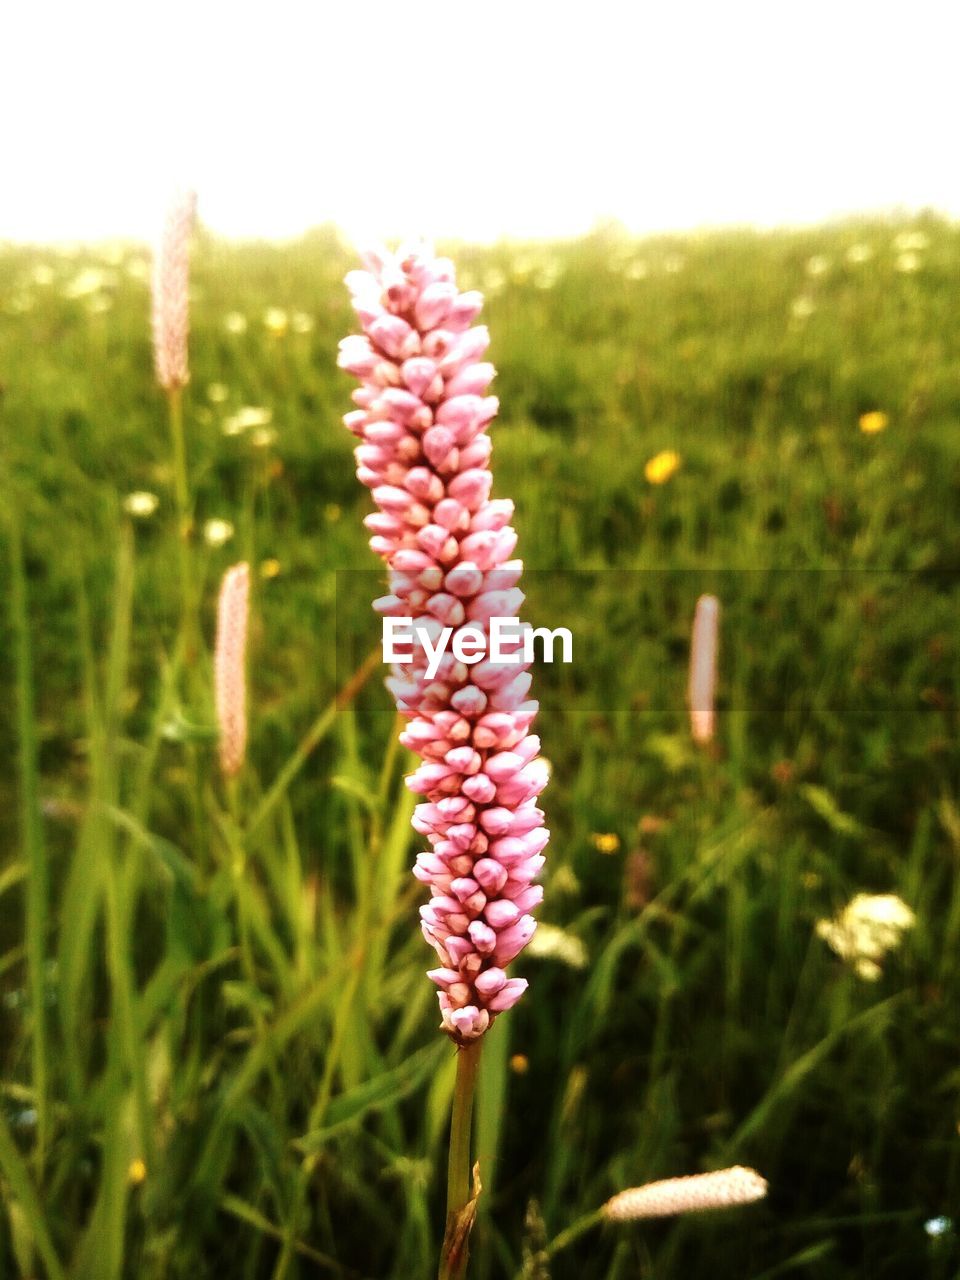 CLOSE-UP OF PINK FLOWERING PLANT IN FIELD